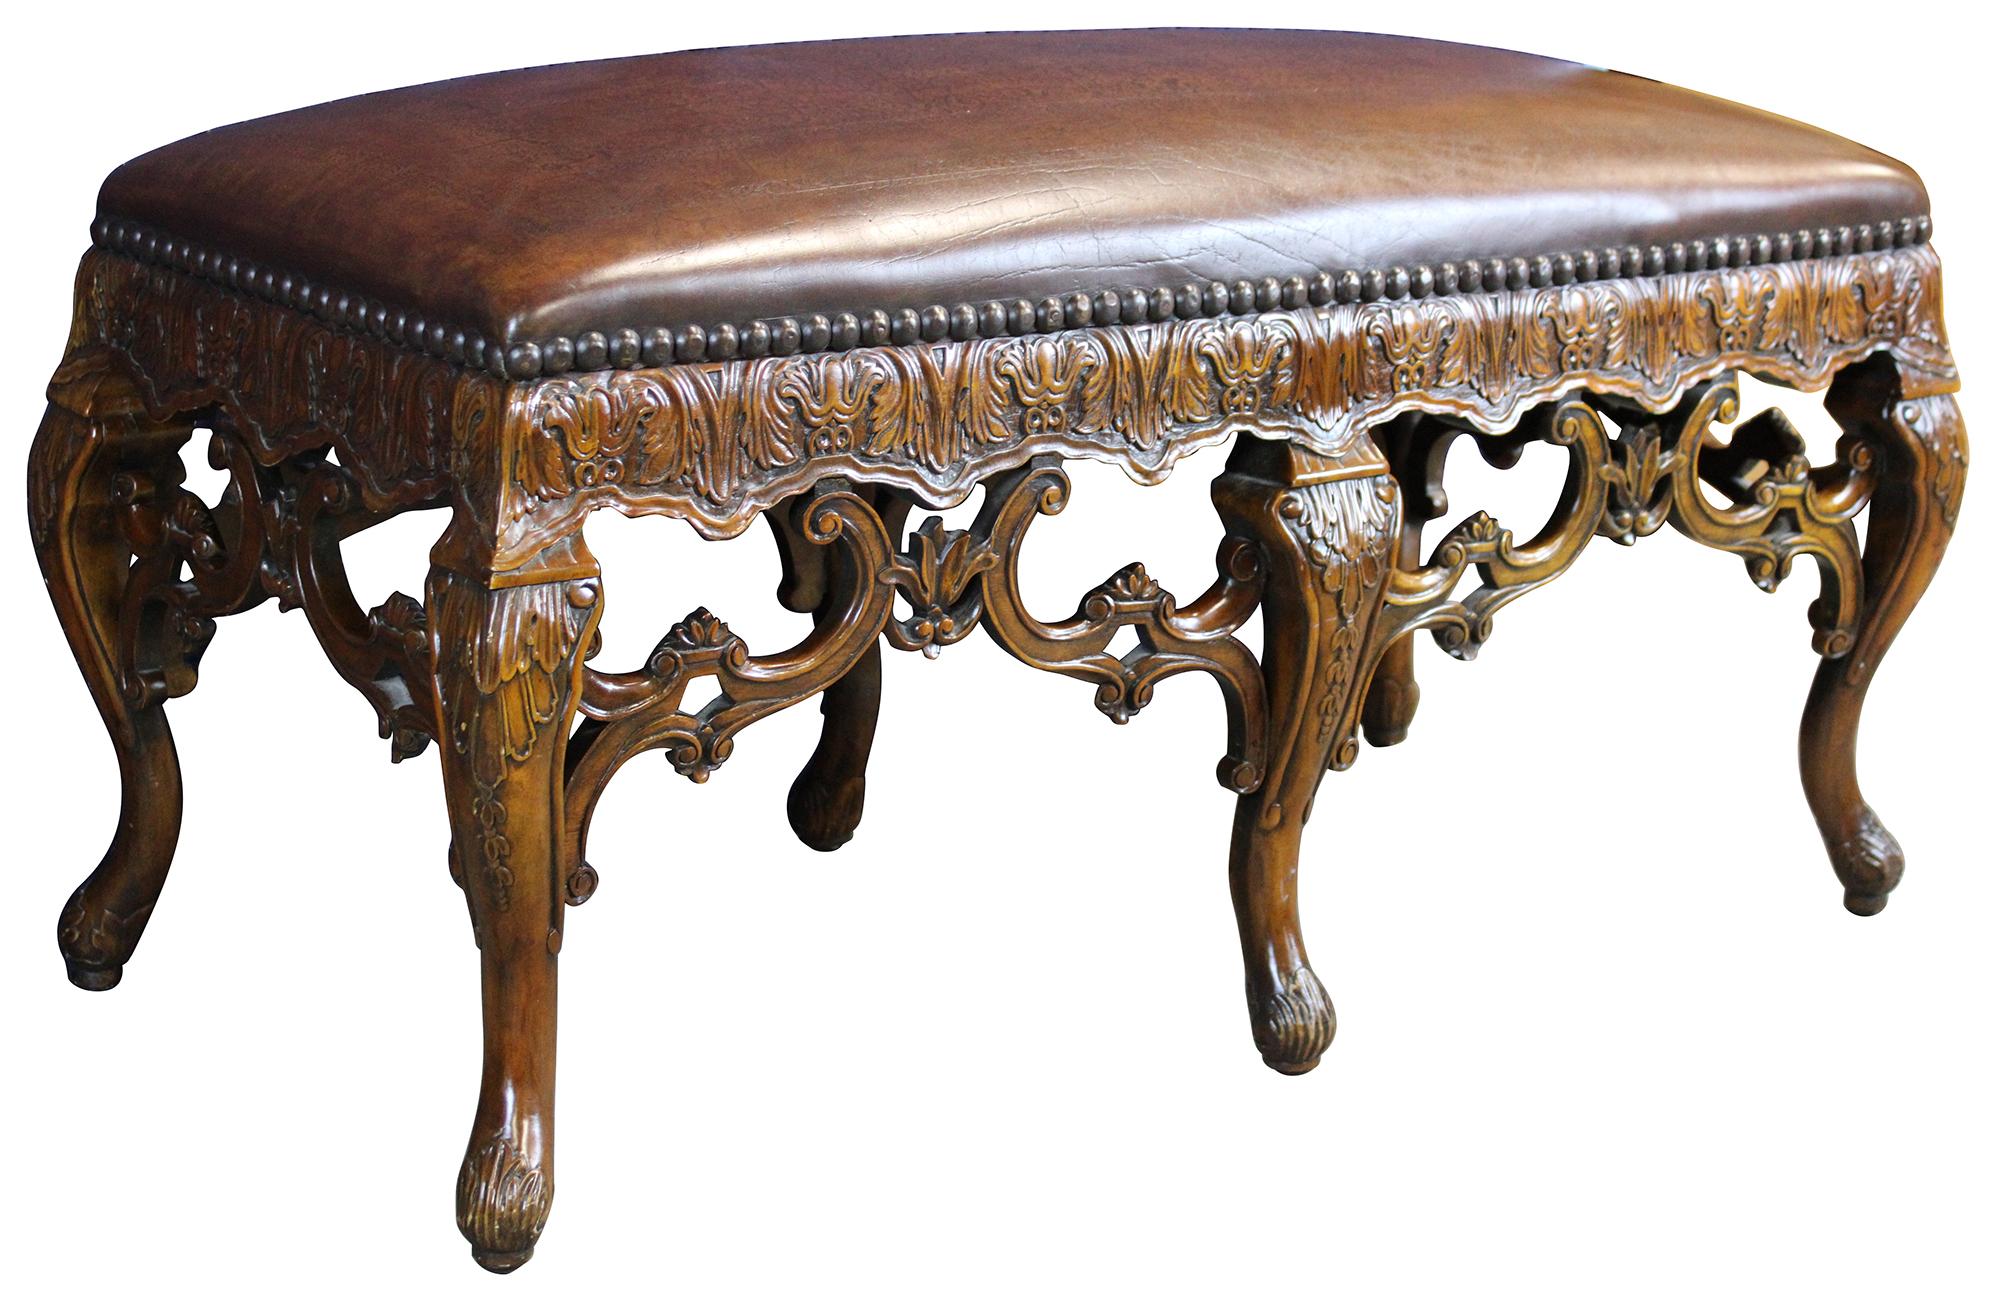 Vintage tooled leather and carved mahogany bench by Theordore Alexander. Features ornate scrolled carvings with floral, shell and acanthus motifs and nailhead trim around the leather. The cabriole legs terminate into scrolling acanthus designed